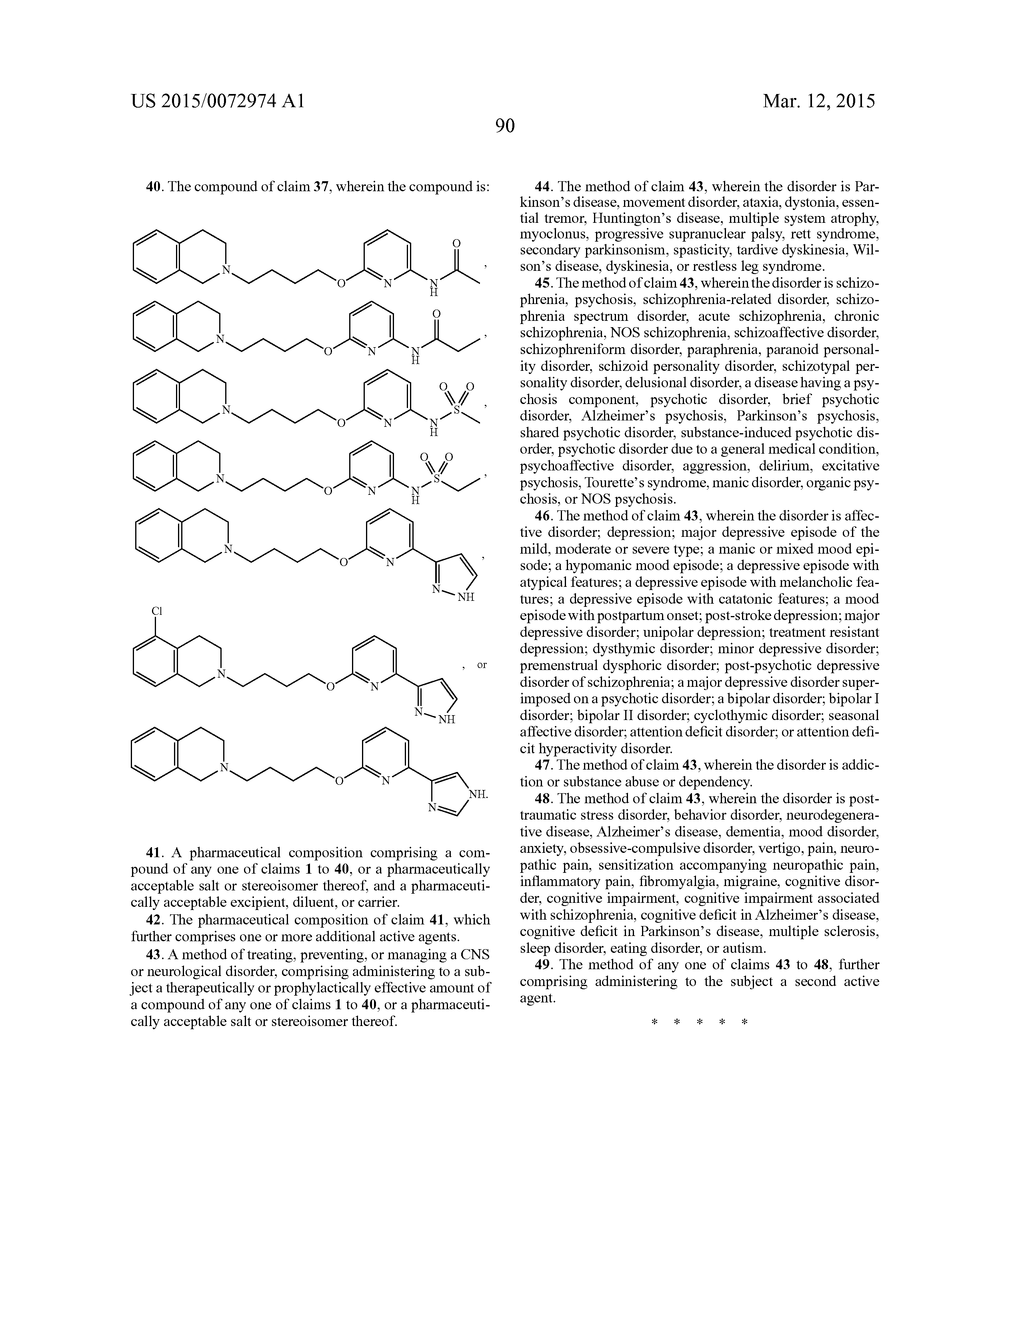 HETEROARYL COMPOUNDS AND METHODS OF USE THEREOF - diagram, schematic, and image 91